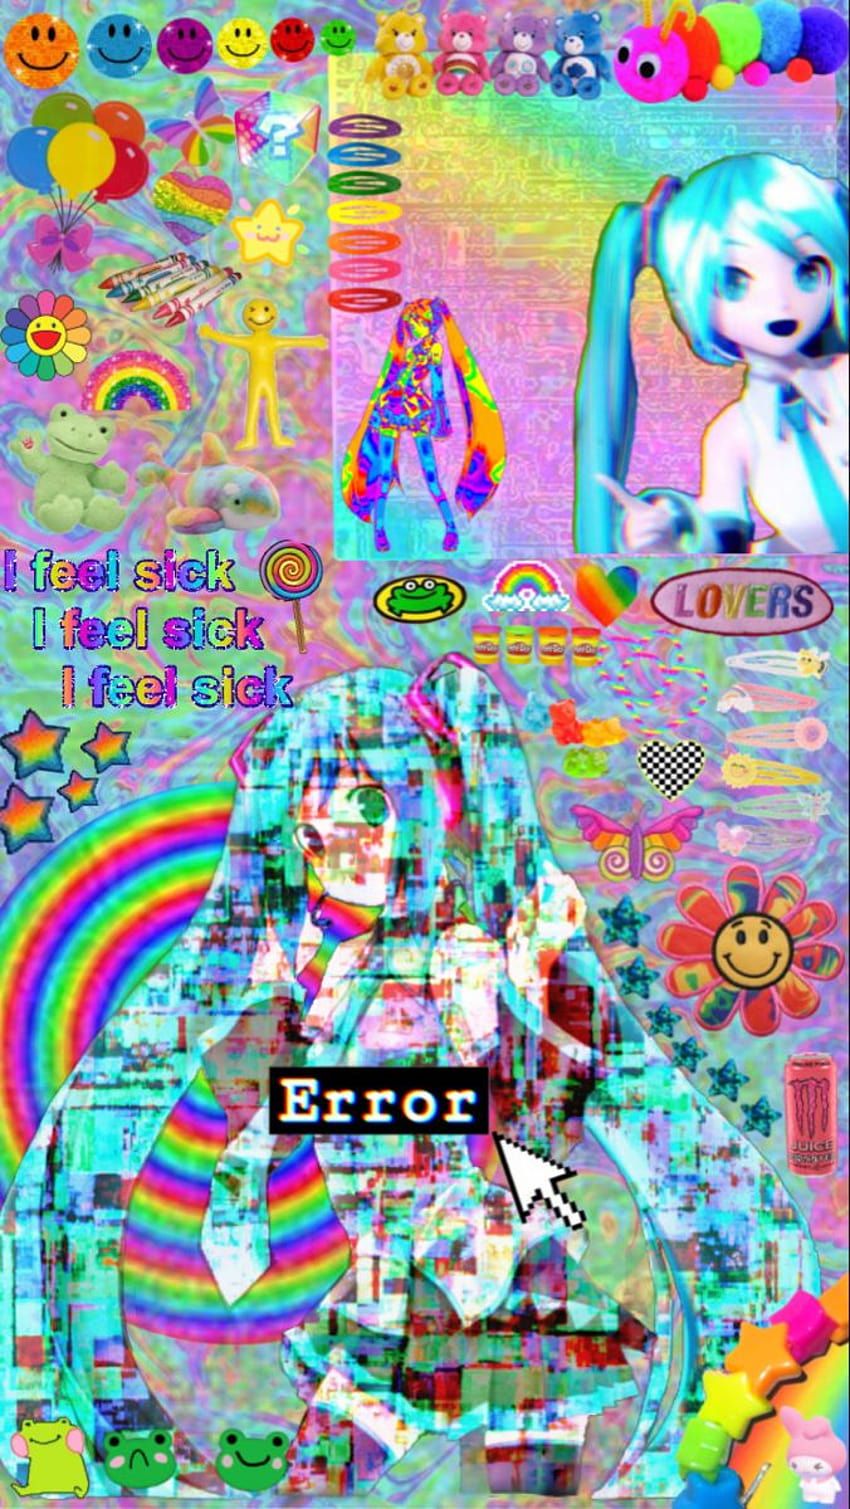 Aesthetic wallpaper for phone background with anime girl and rainbow. - Glitchcore, kidcore